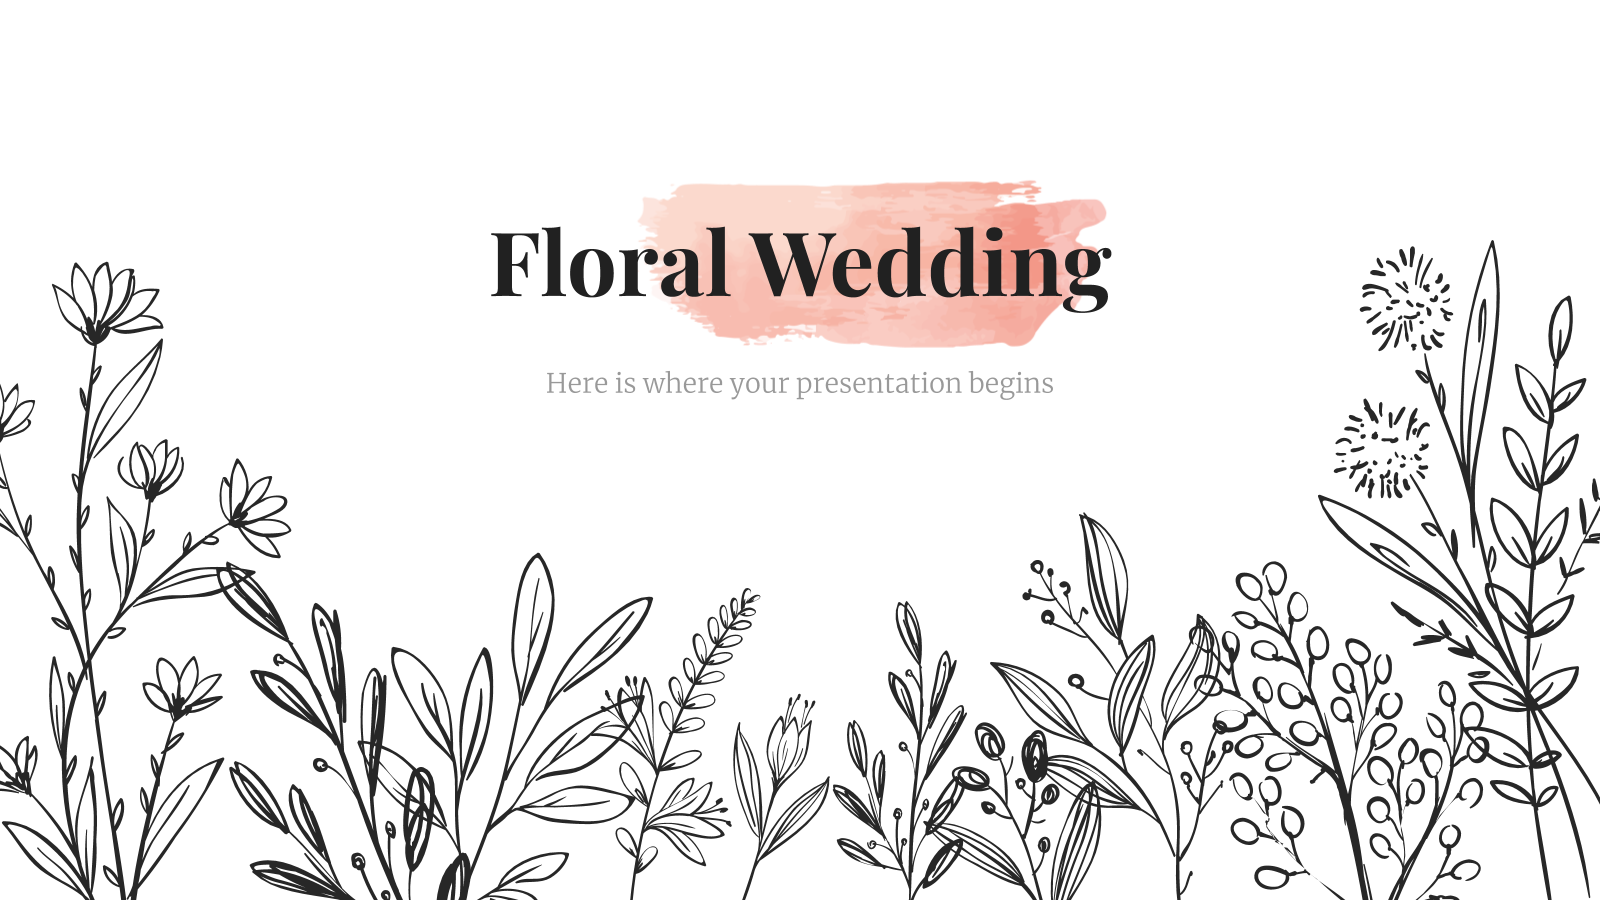 Floral Wedding Powerpoint Template1